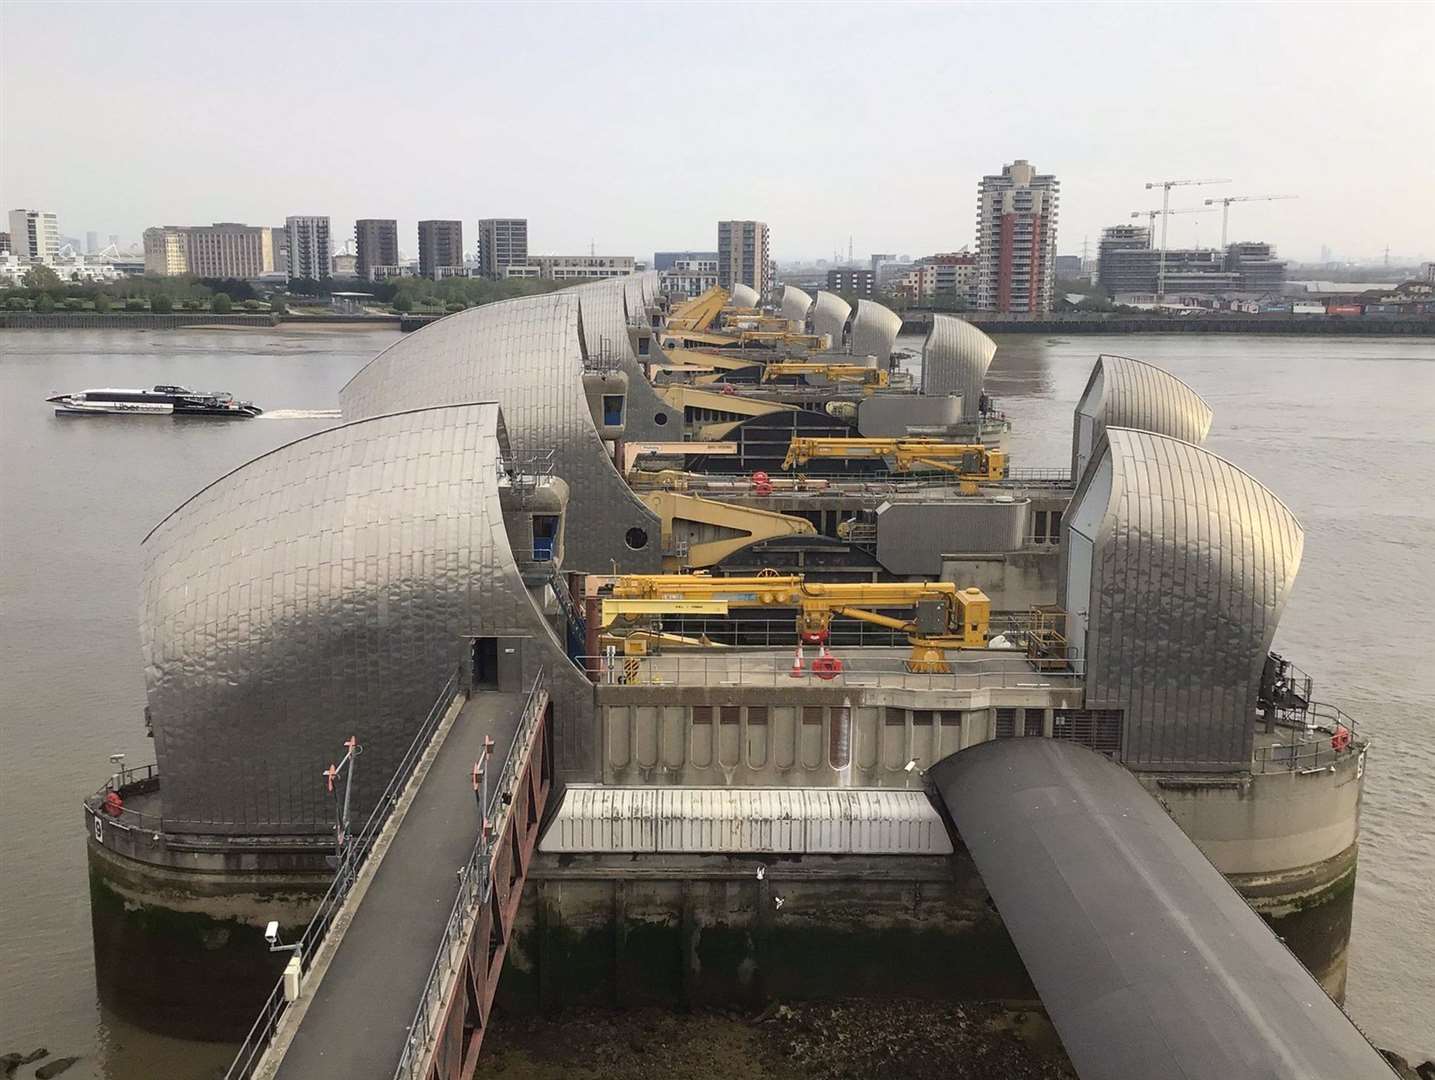 The Thames Barrier will close today due to high tides. Picture: Alan Atkin/Environment Agency